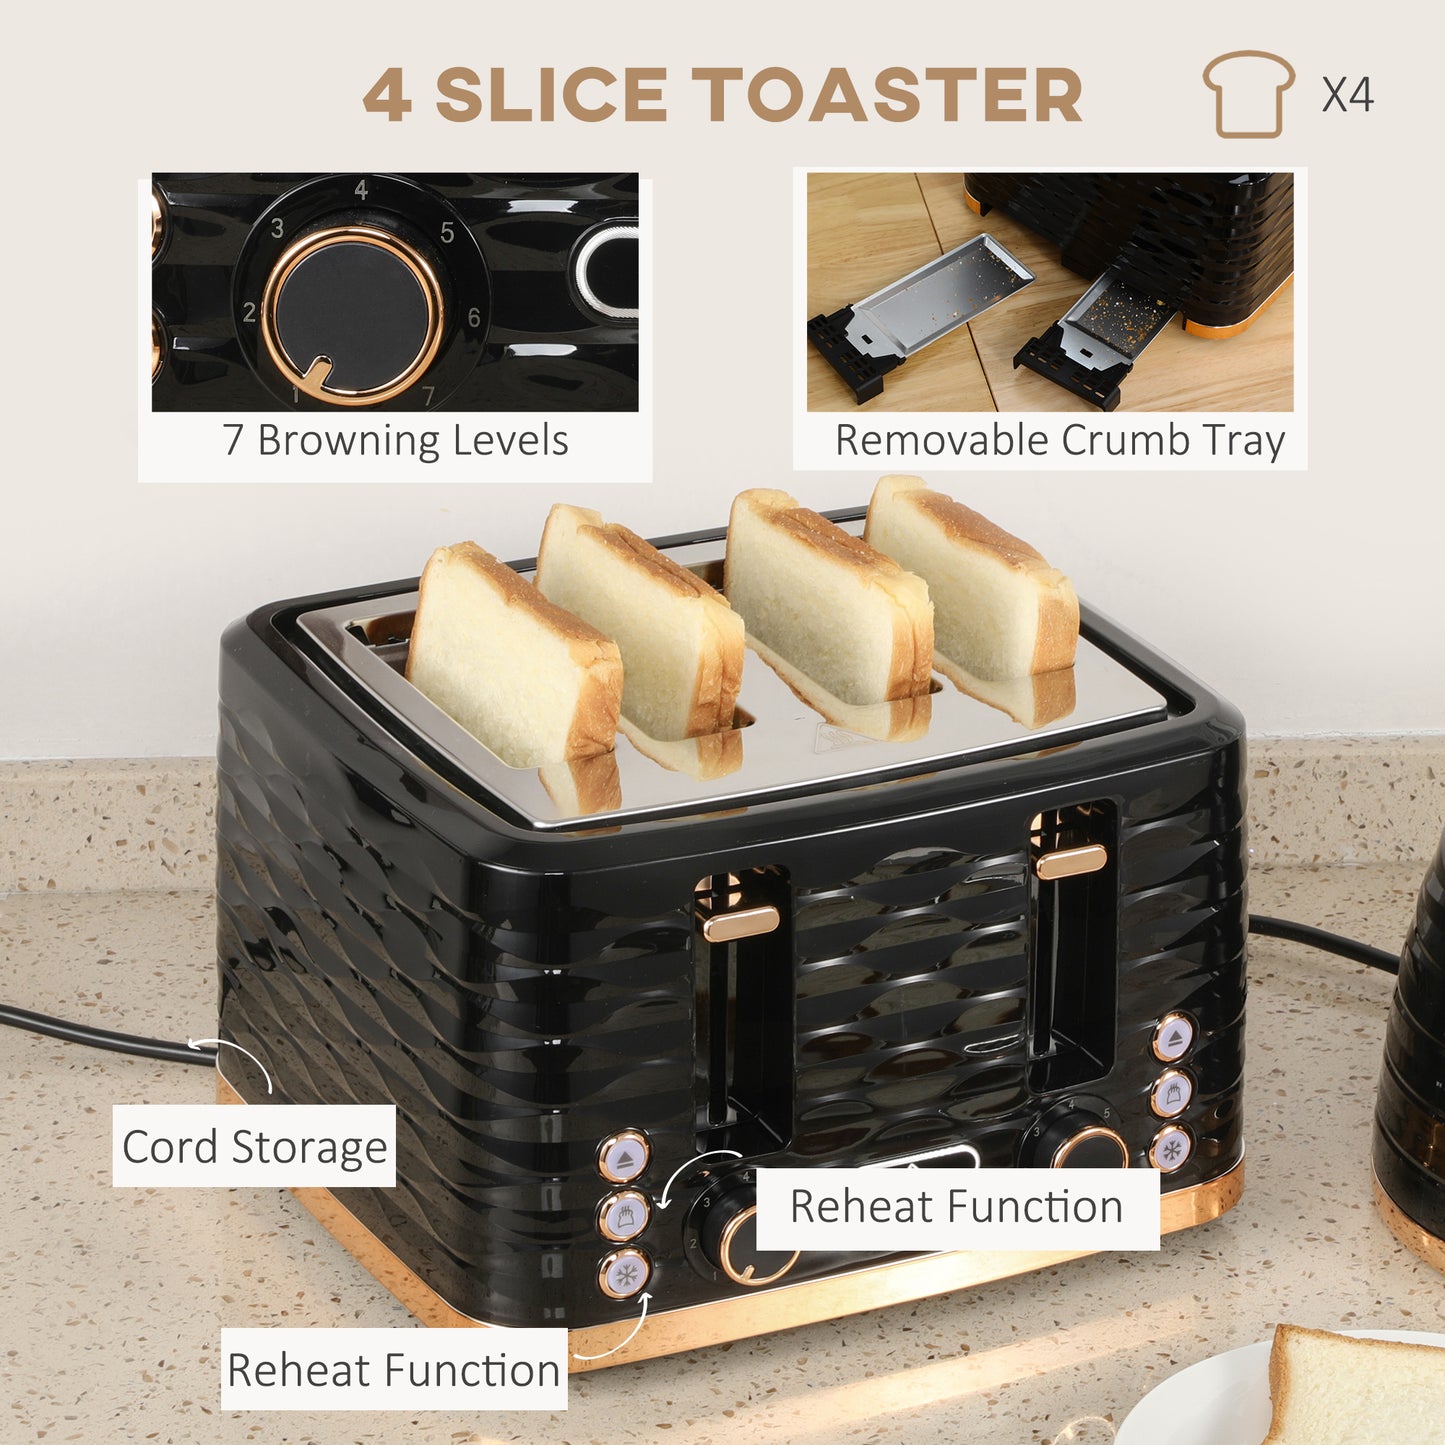 HOMCOM Kettle and Toaster Sets, 1600W 1.7L Rapid Boil Kettle & 4 Slice Toaster with 7 Browning Controls, Defrost, Reheat and Crumb Tray, Otter thermostat, Black